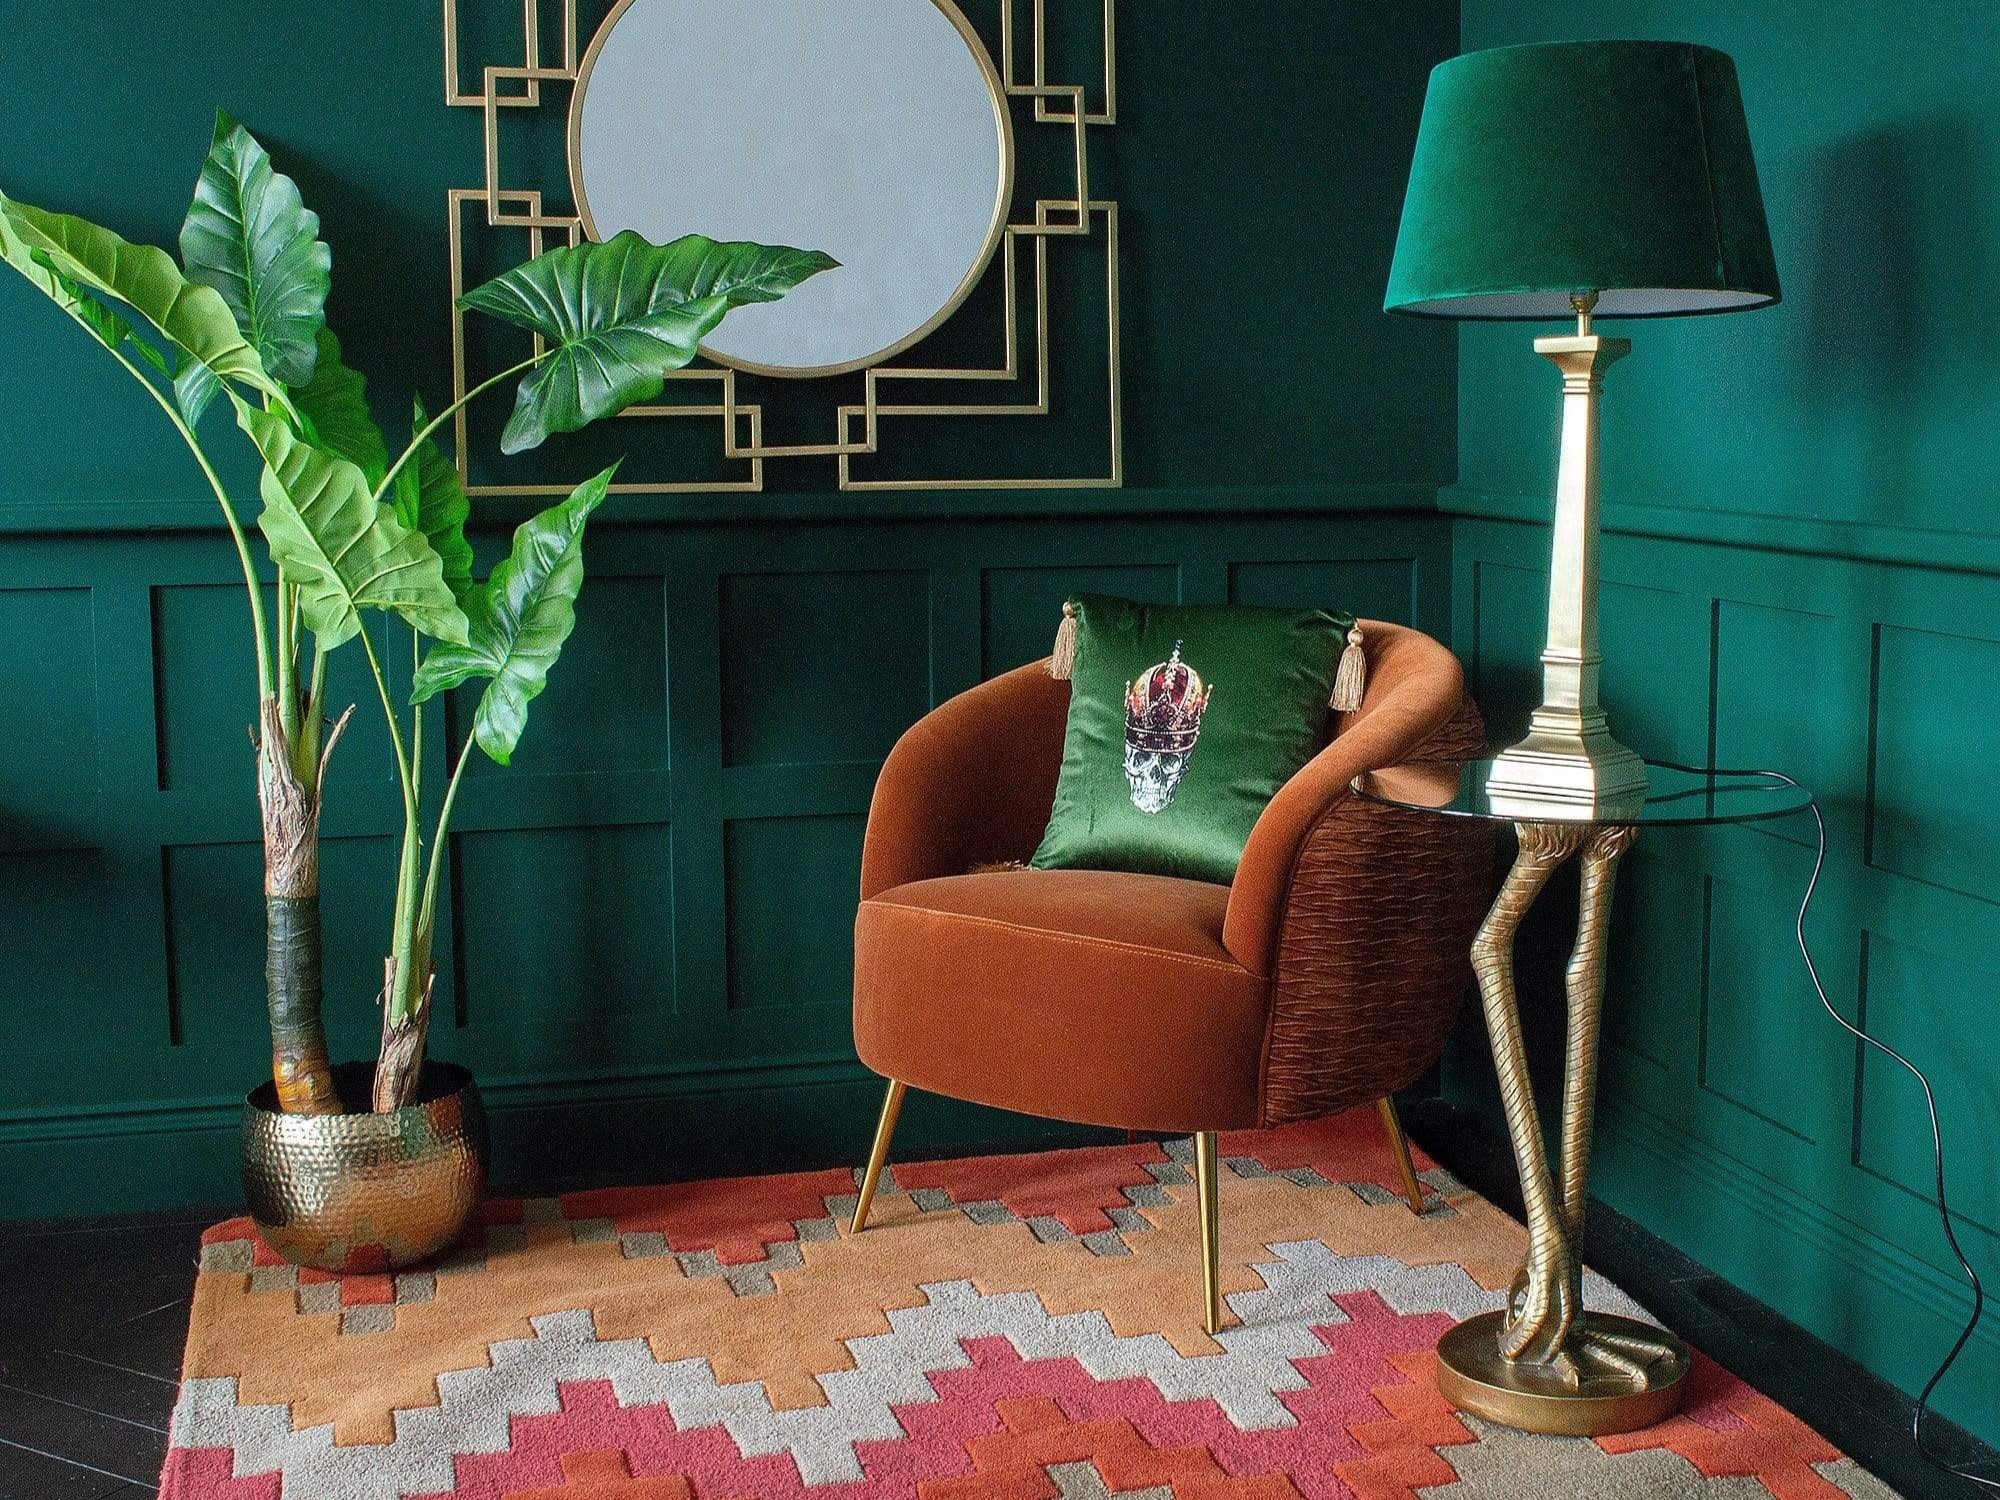 An orange armchair with a green cushion, and a tall green lamp next to it on a colourful rug